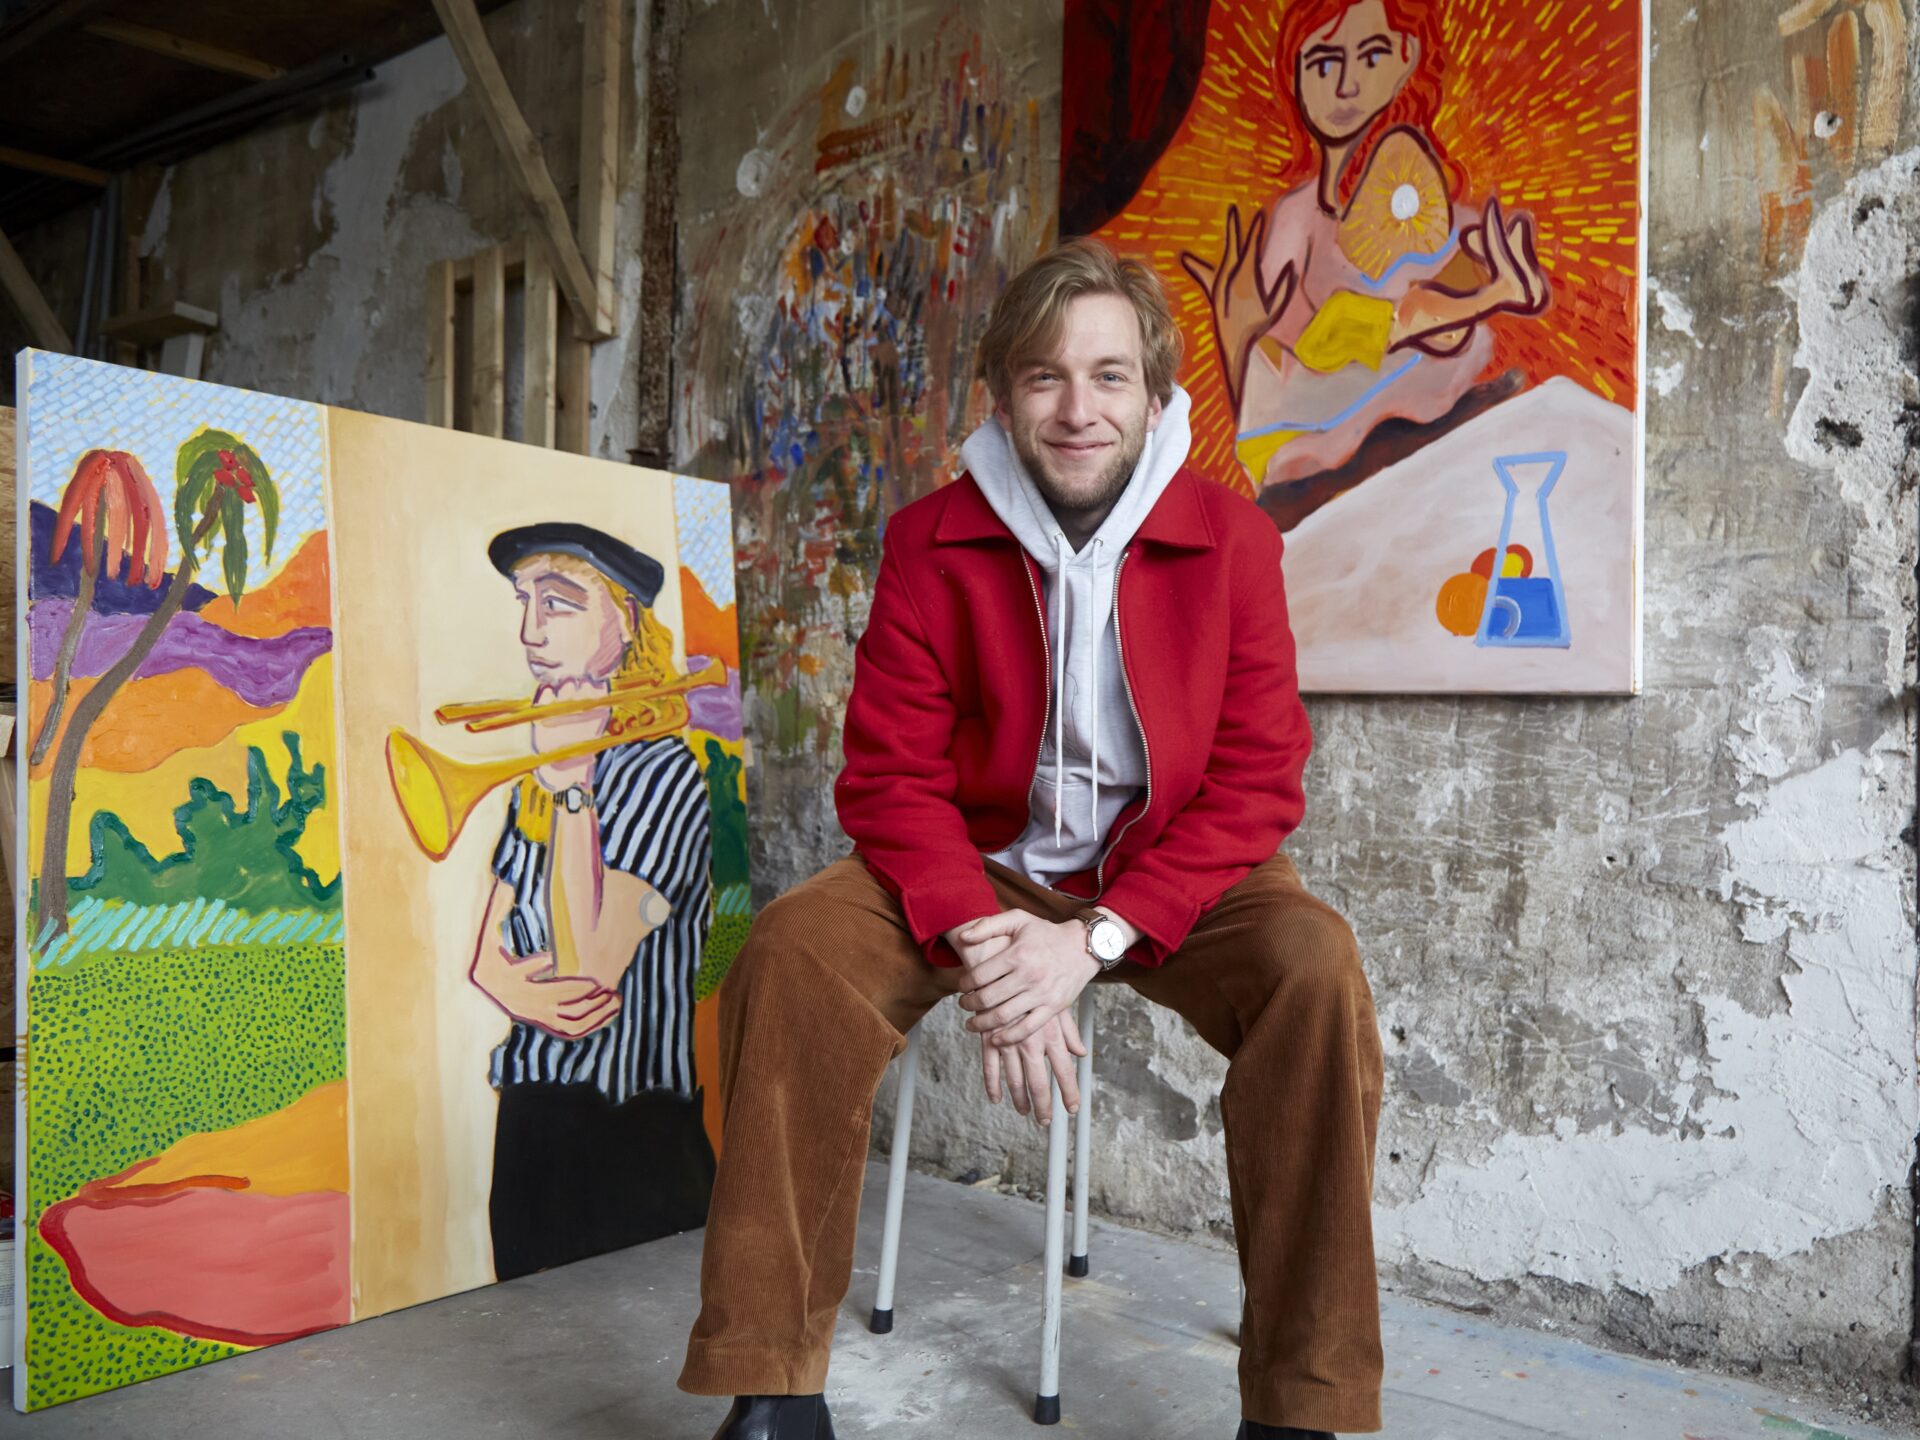 Artist smiles with colorful paintings in studio.